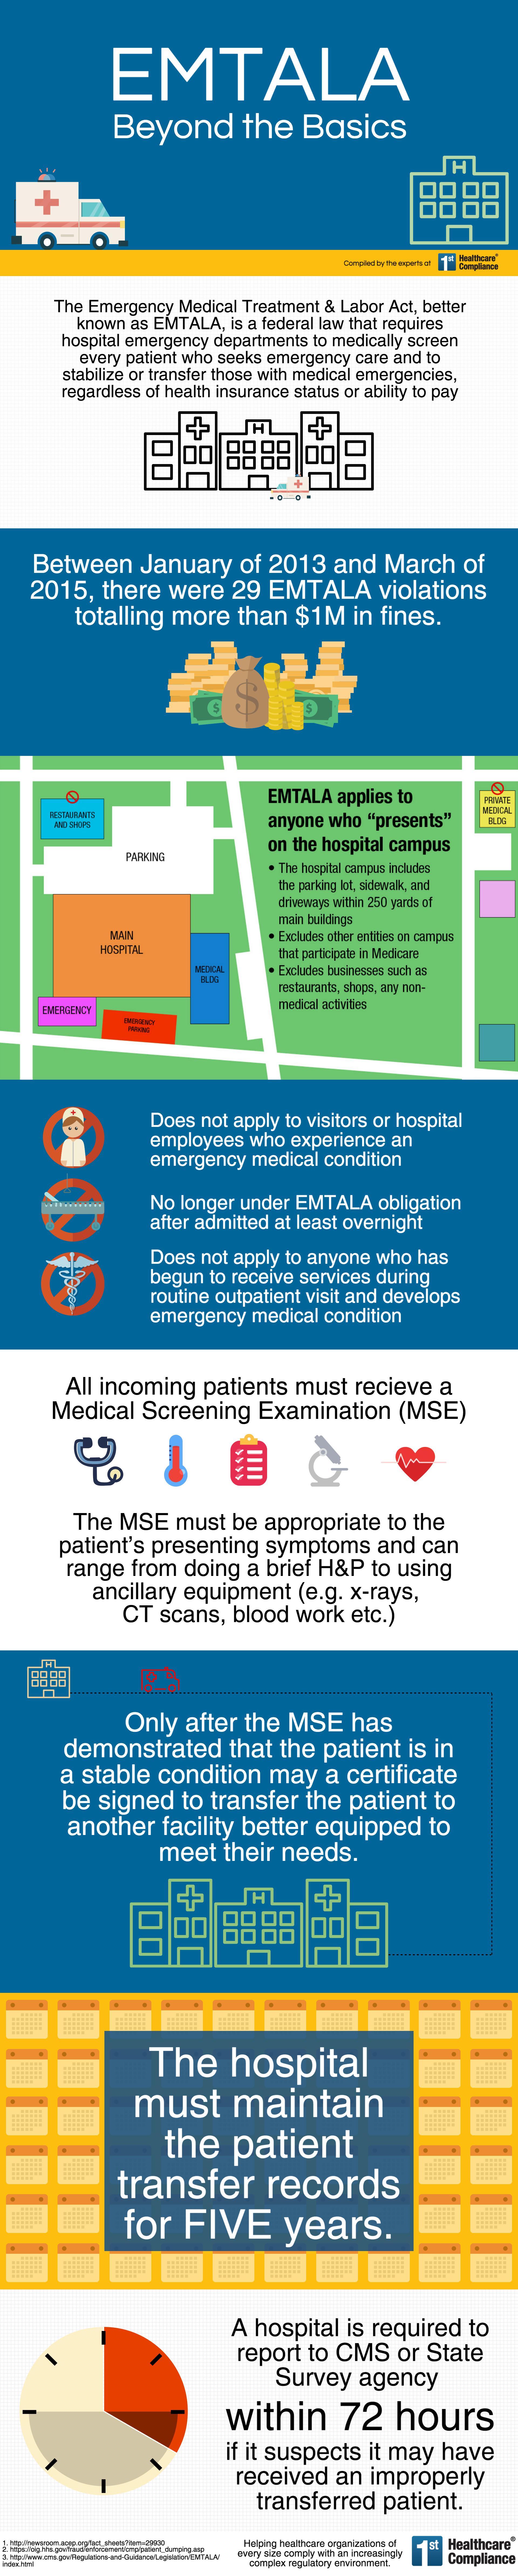 Infographic EMTALA Beyond The Basics First Healthcare Compliance